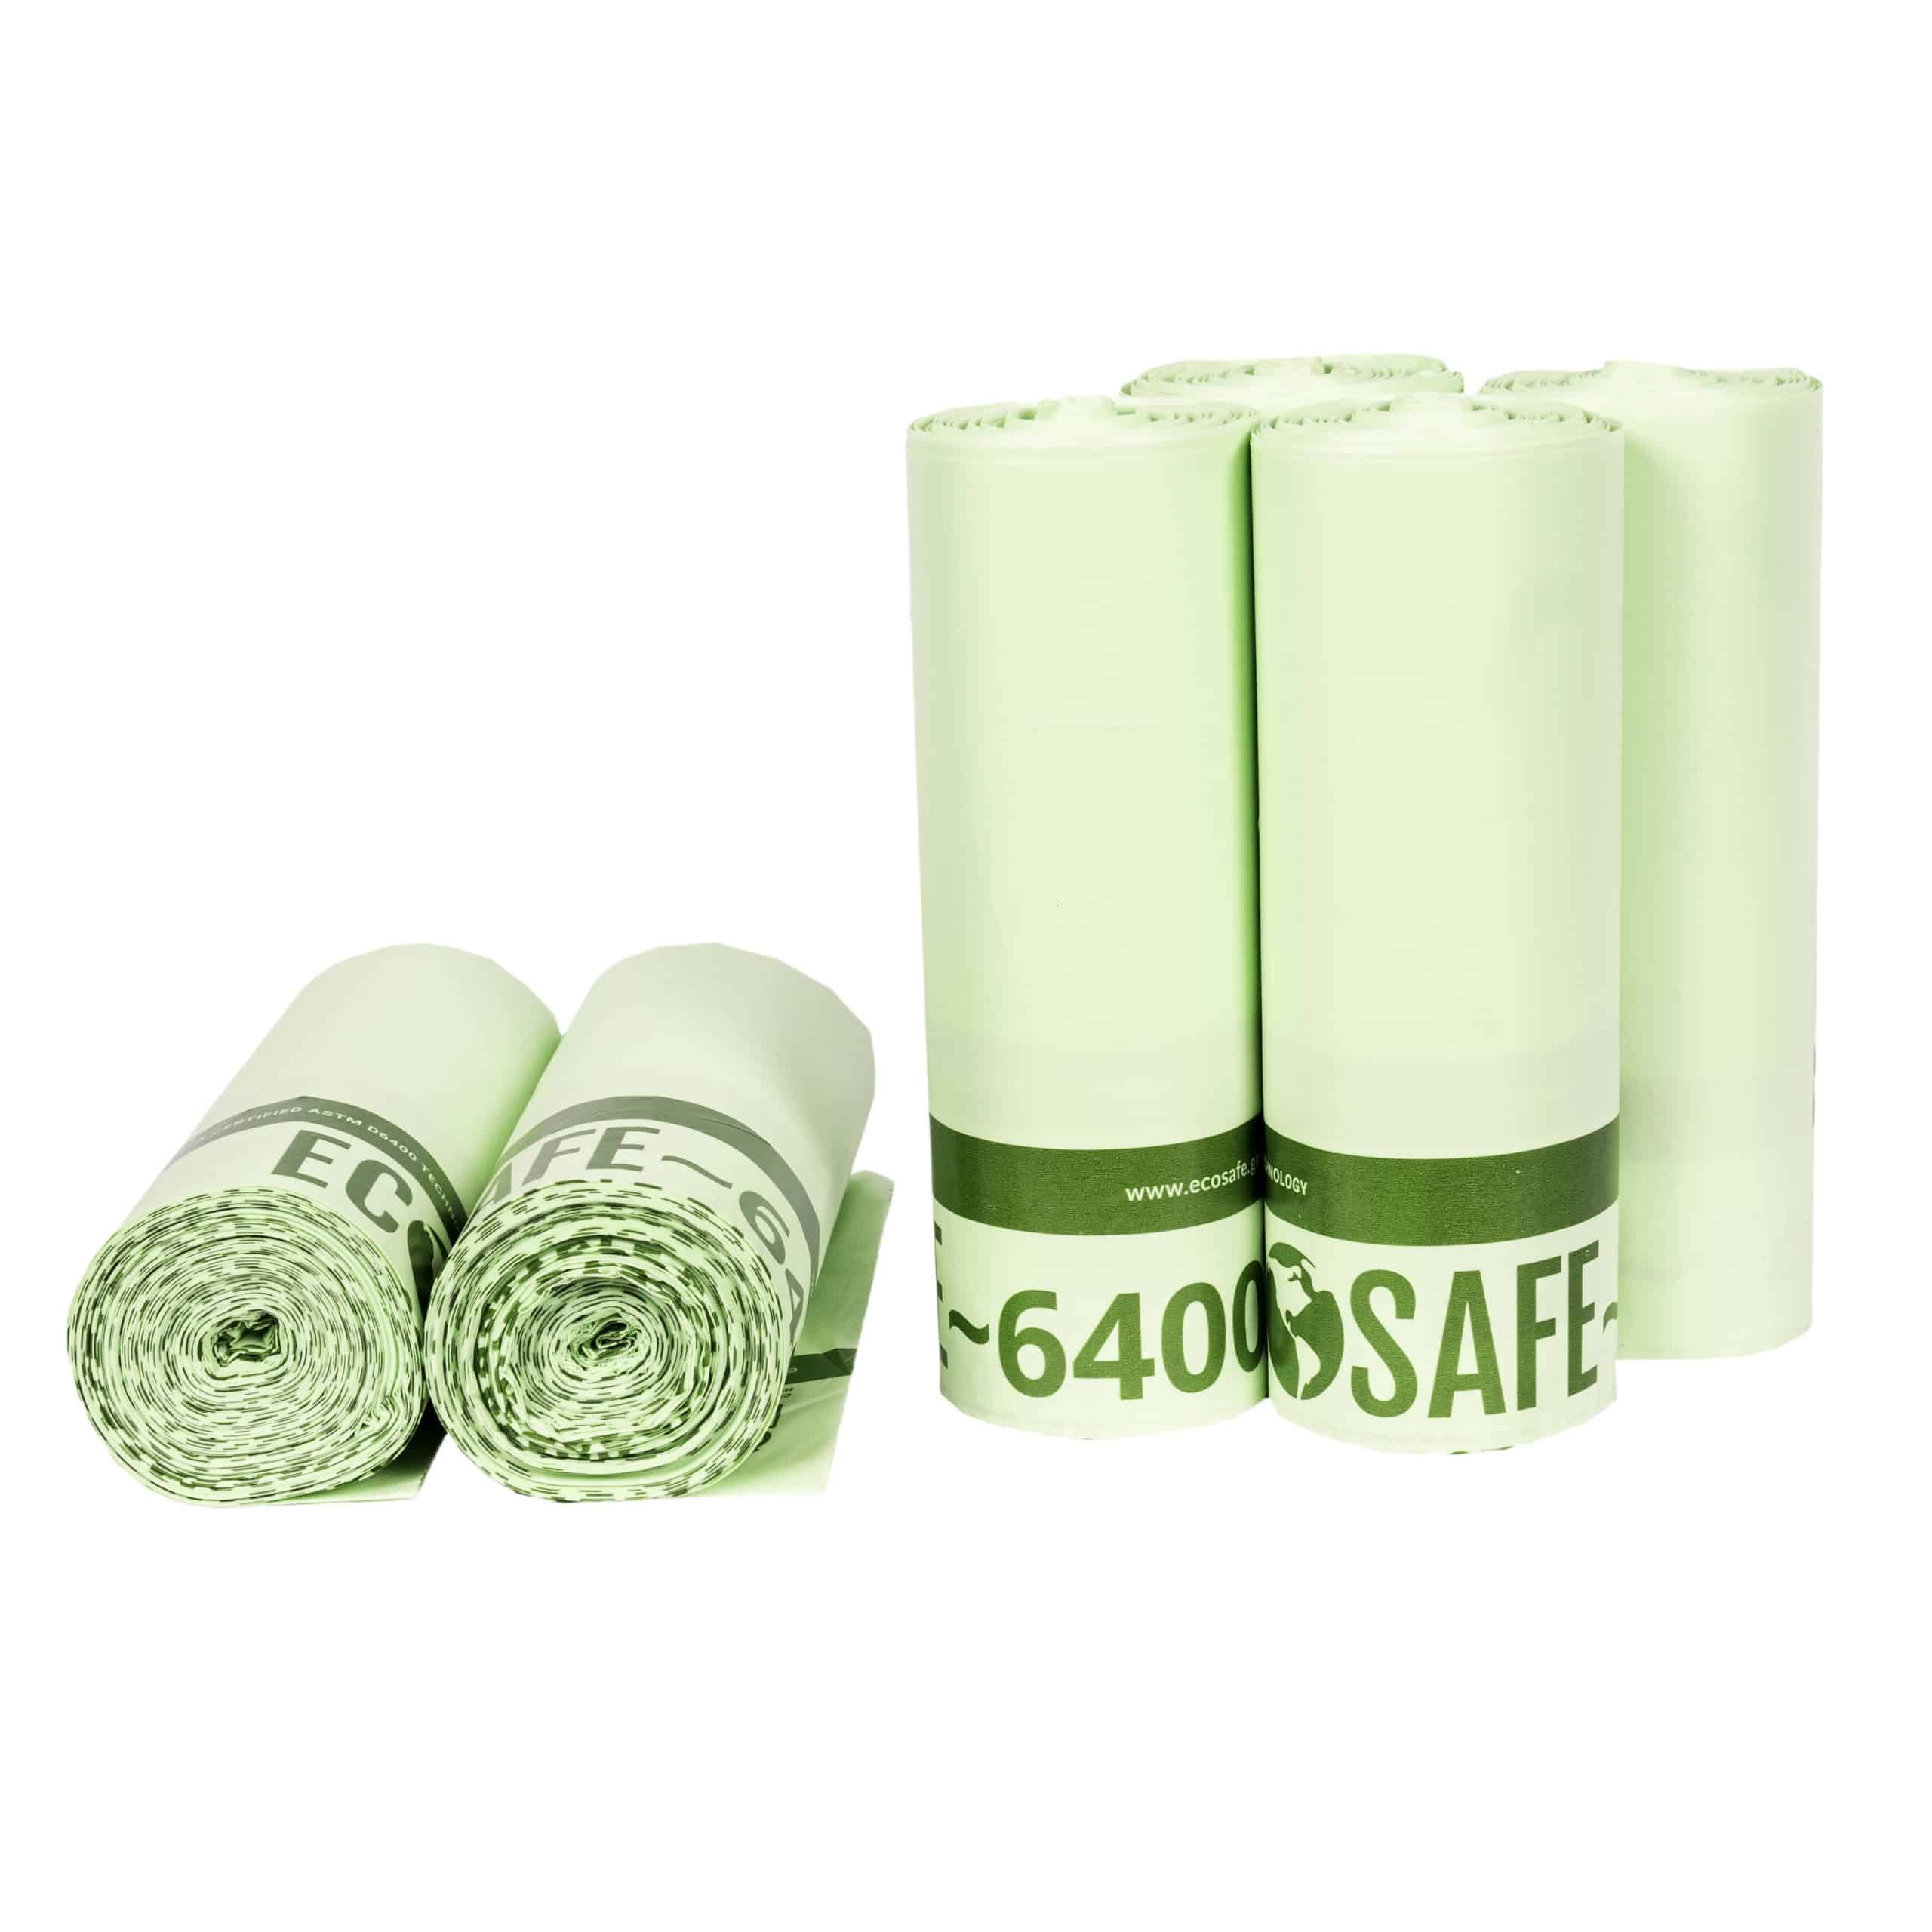 EcoSafe-Compostable-Bags-HB3348-85-Rolls-min